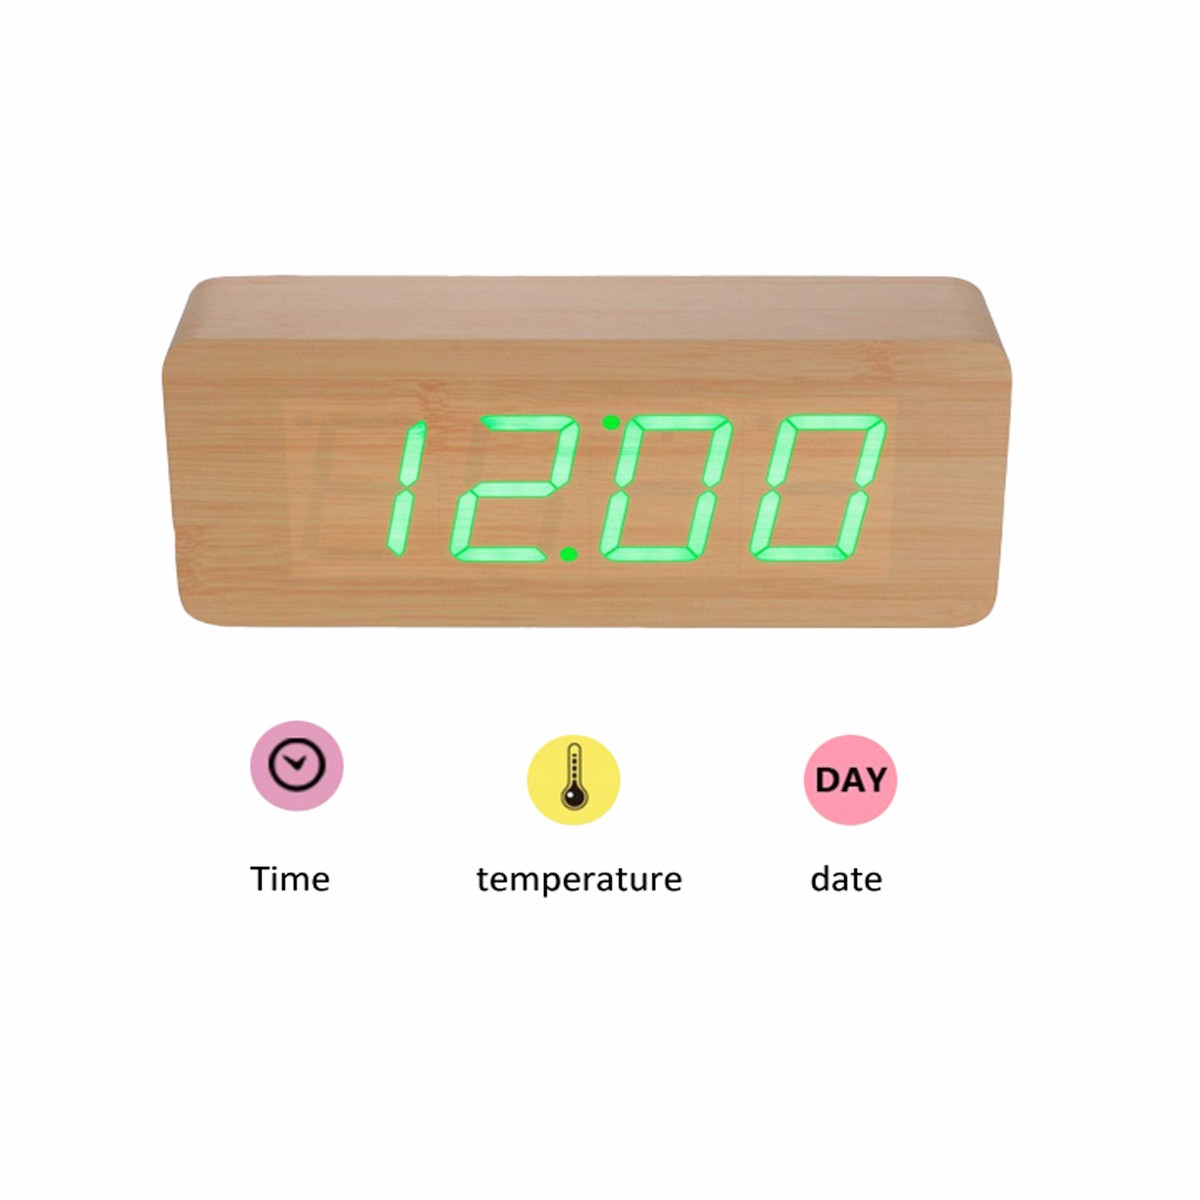 Multifunctional-Wooden-Digital-Clock-Two-Modes-Default-Display-Time-Built-in-Battery-Voice-Control-S-1891907-3